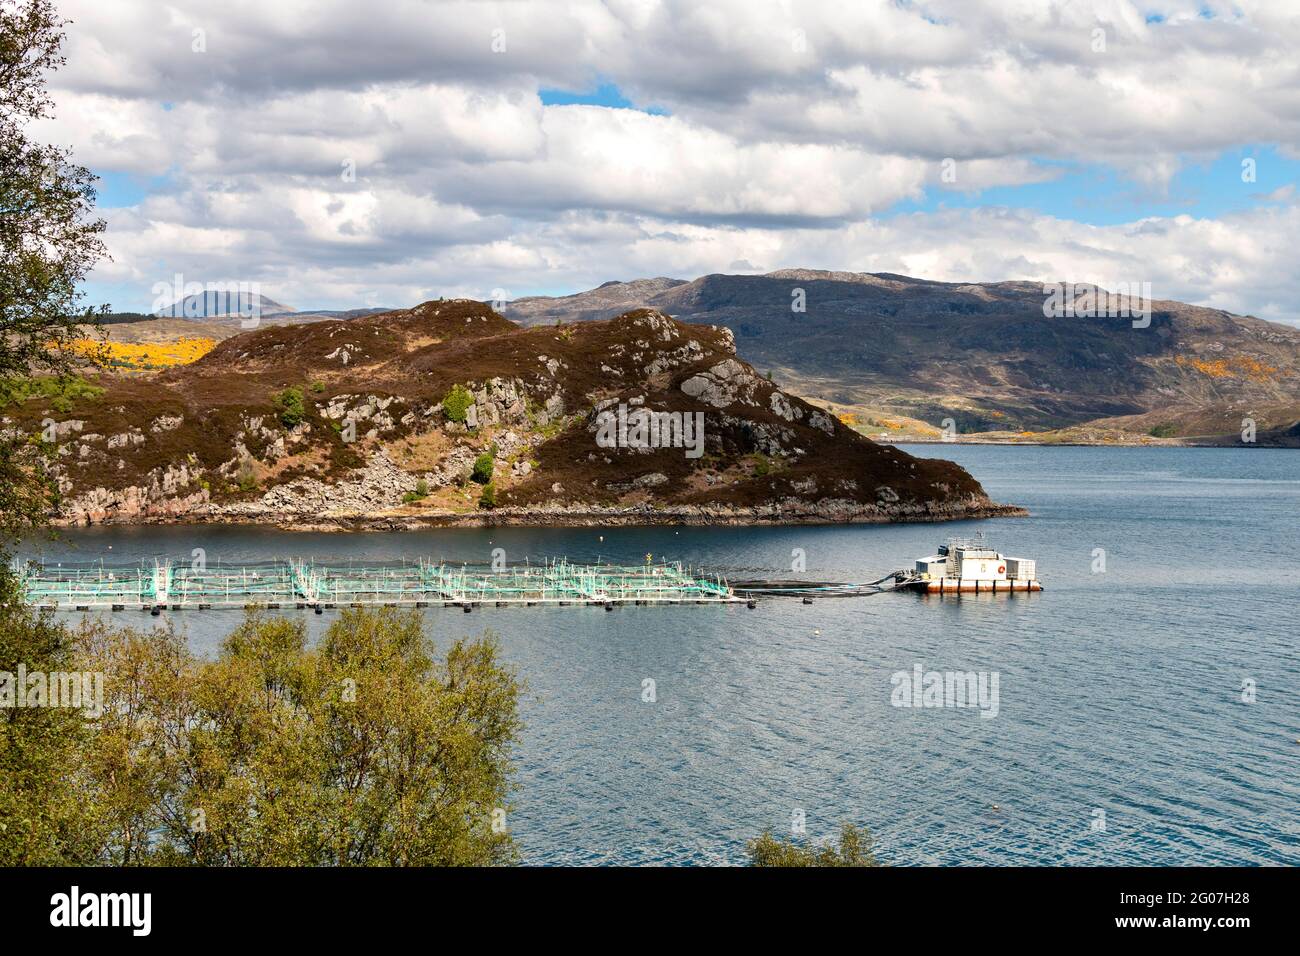 SALMON FISH REARING CAGES MOORED IN LOCH A CHAIRN BHAIN NEAR TO KYLESKU  SCOTLAND Stock Photo